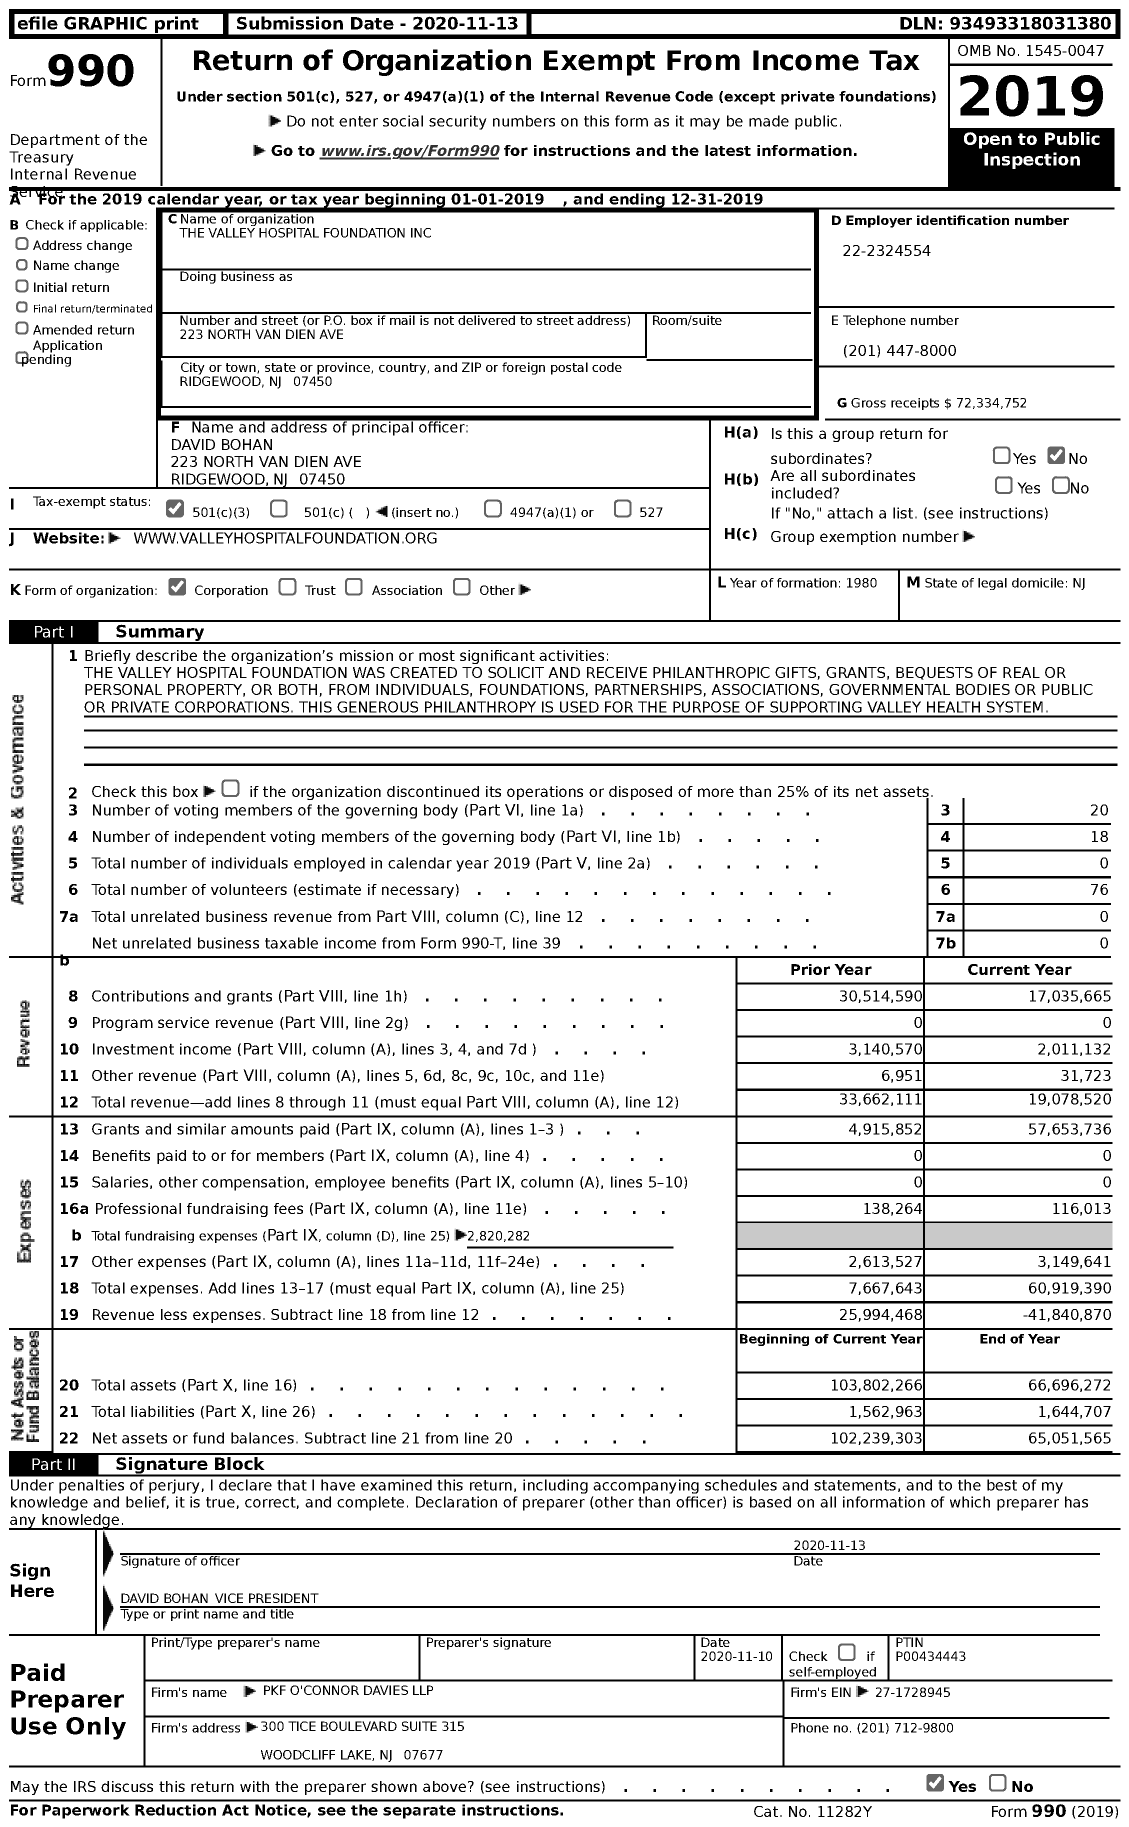 Image of first page of 2019 Form 990 for Valley Hospital Foundation (VHF)